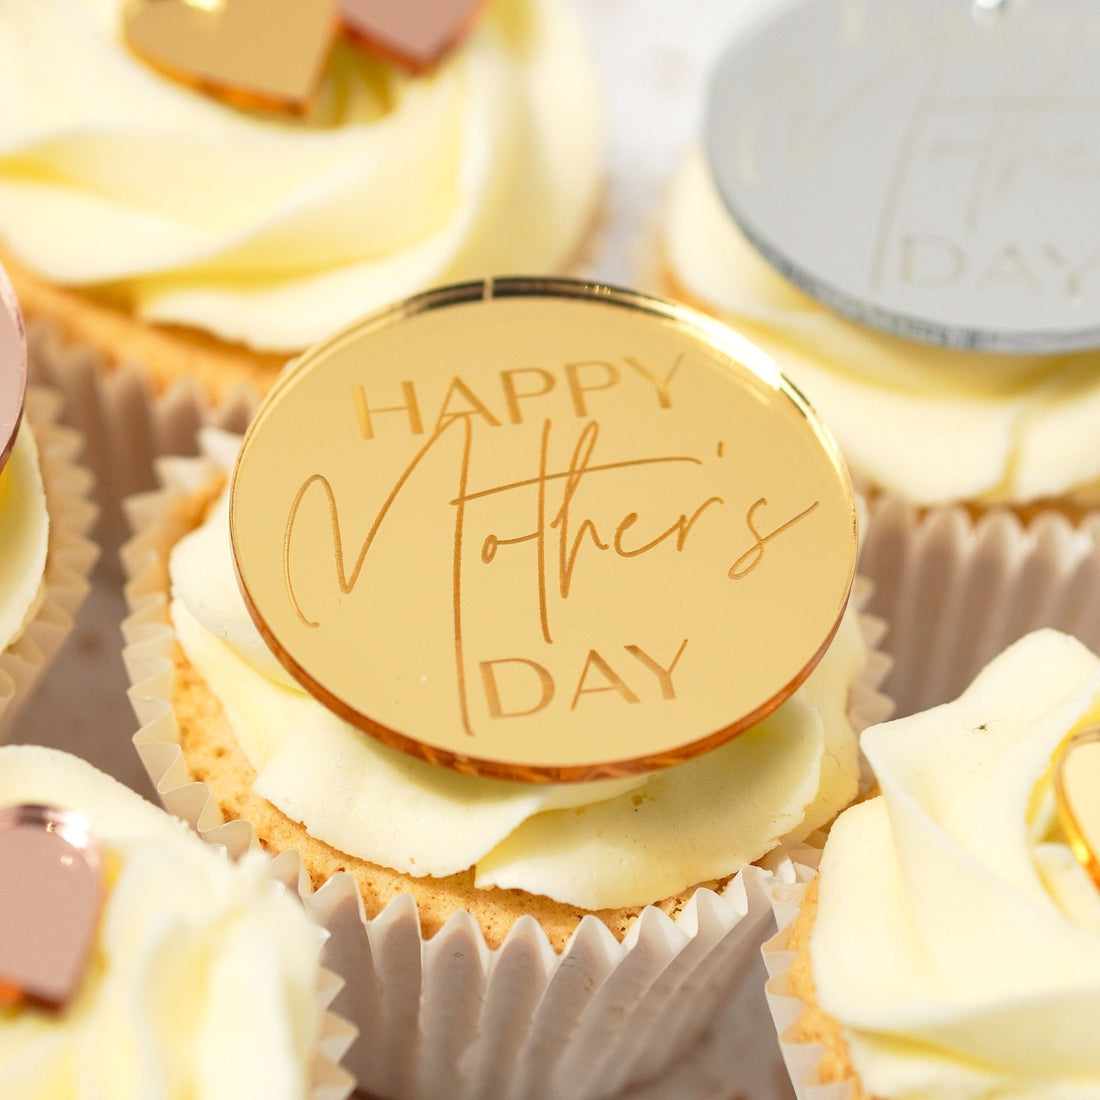 Happy Mothers Day cake charm